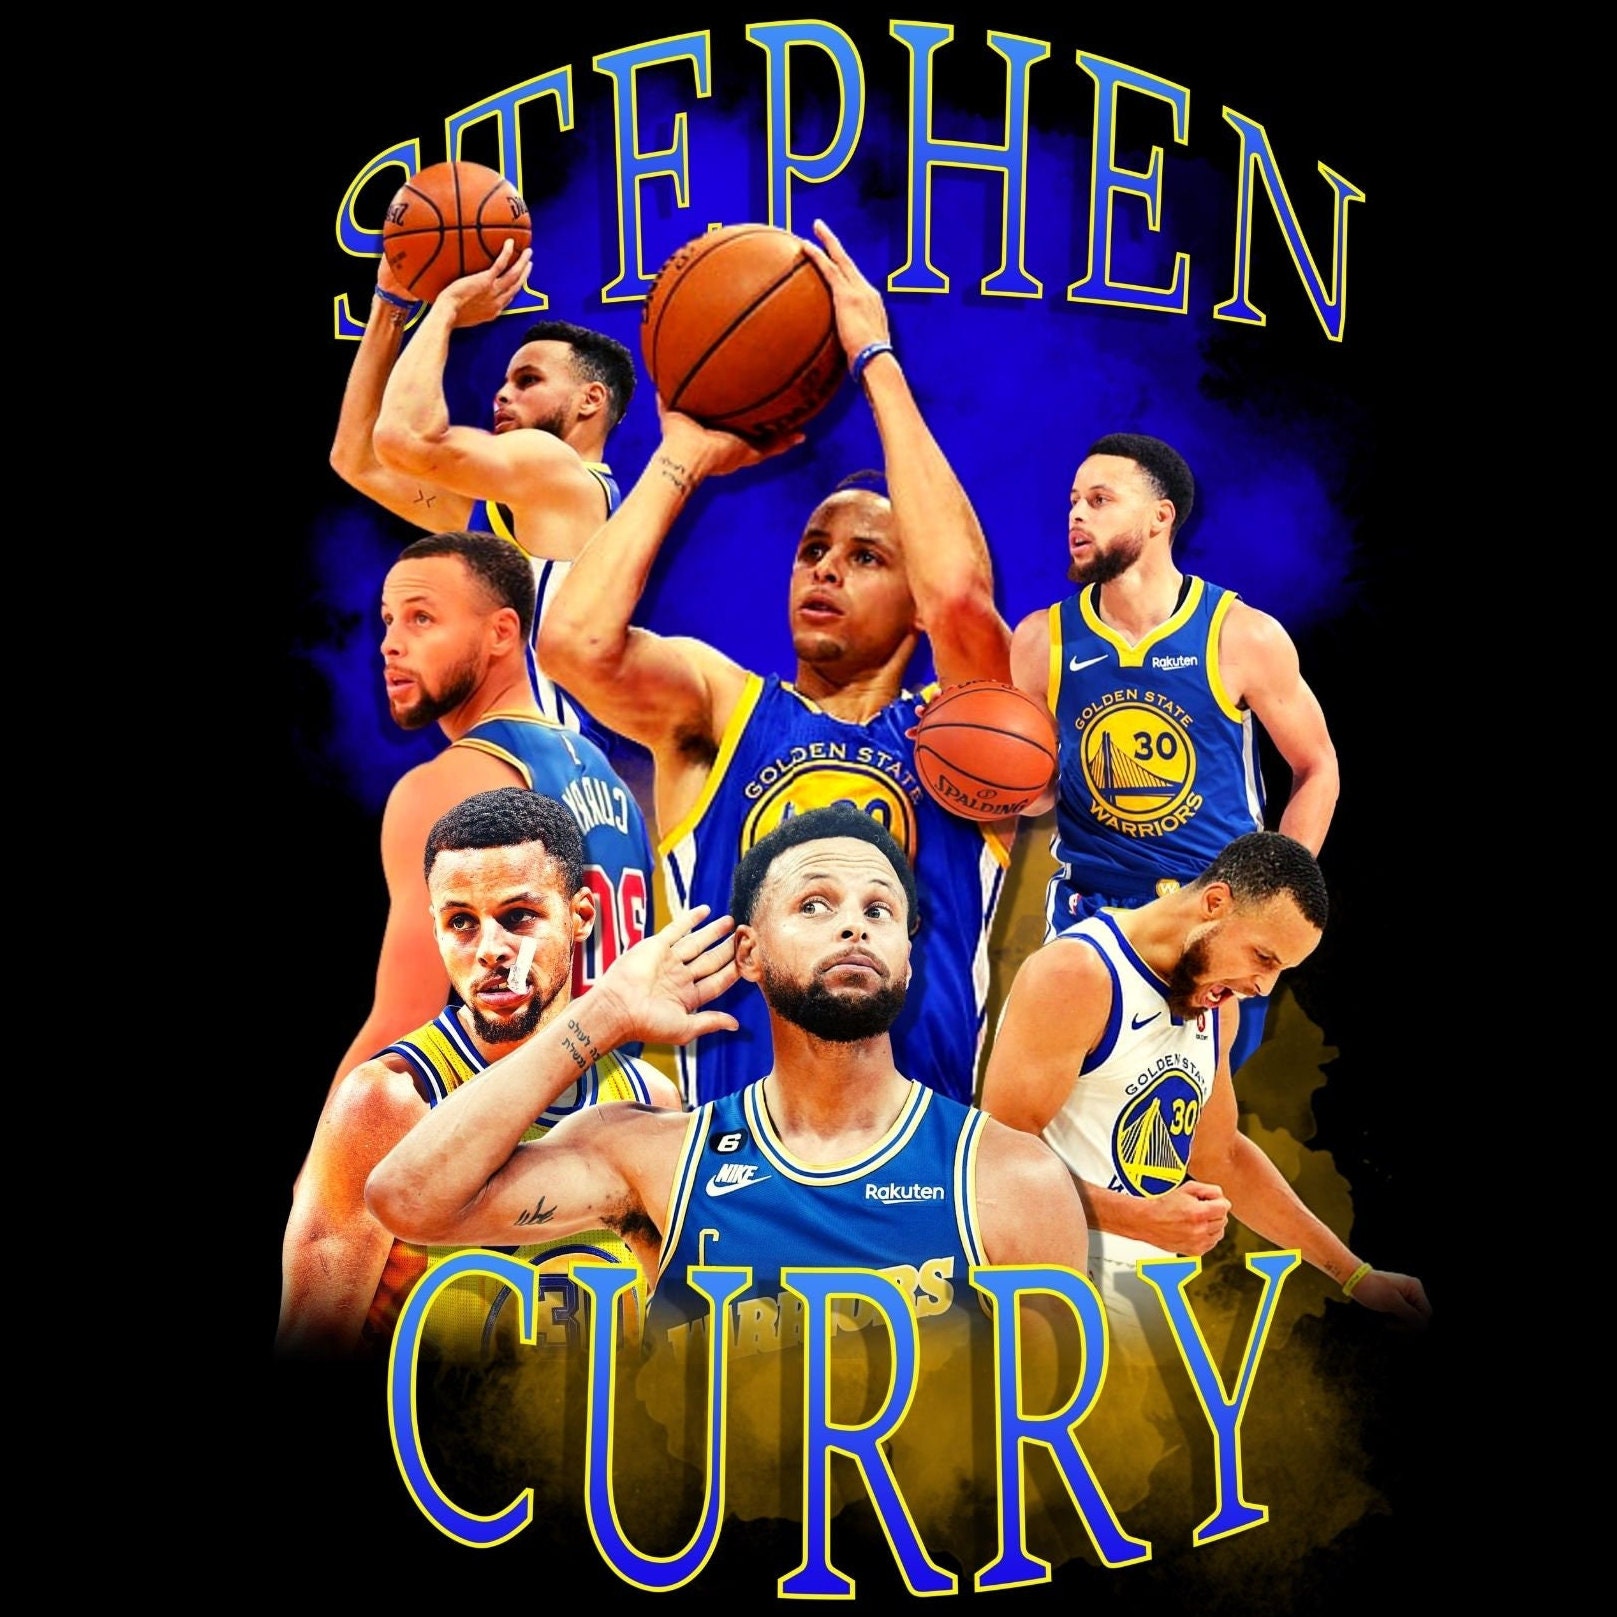 STEPHEN CURRY T Shirt Design. PNG Digital 4500x5100 px. Basketball Retro,  90s Vintage, Bootleg Tee. Instant Download And Ready To Print.